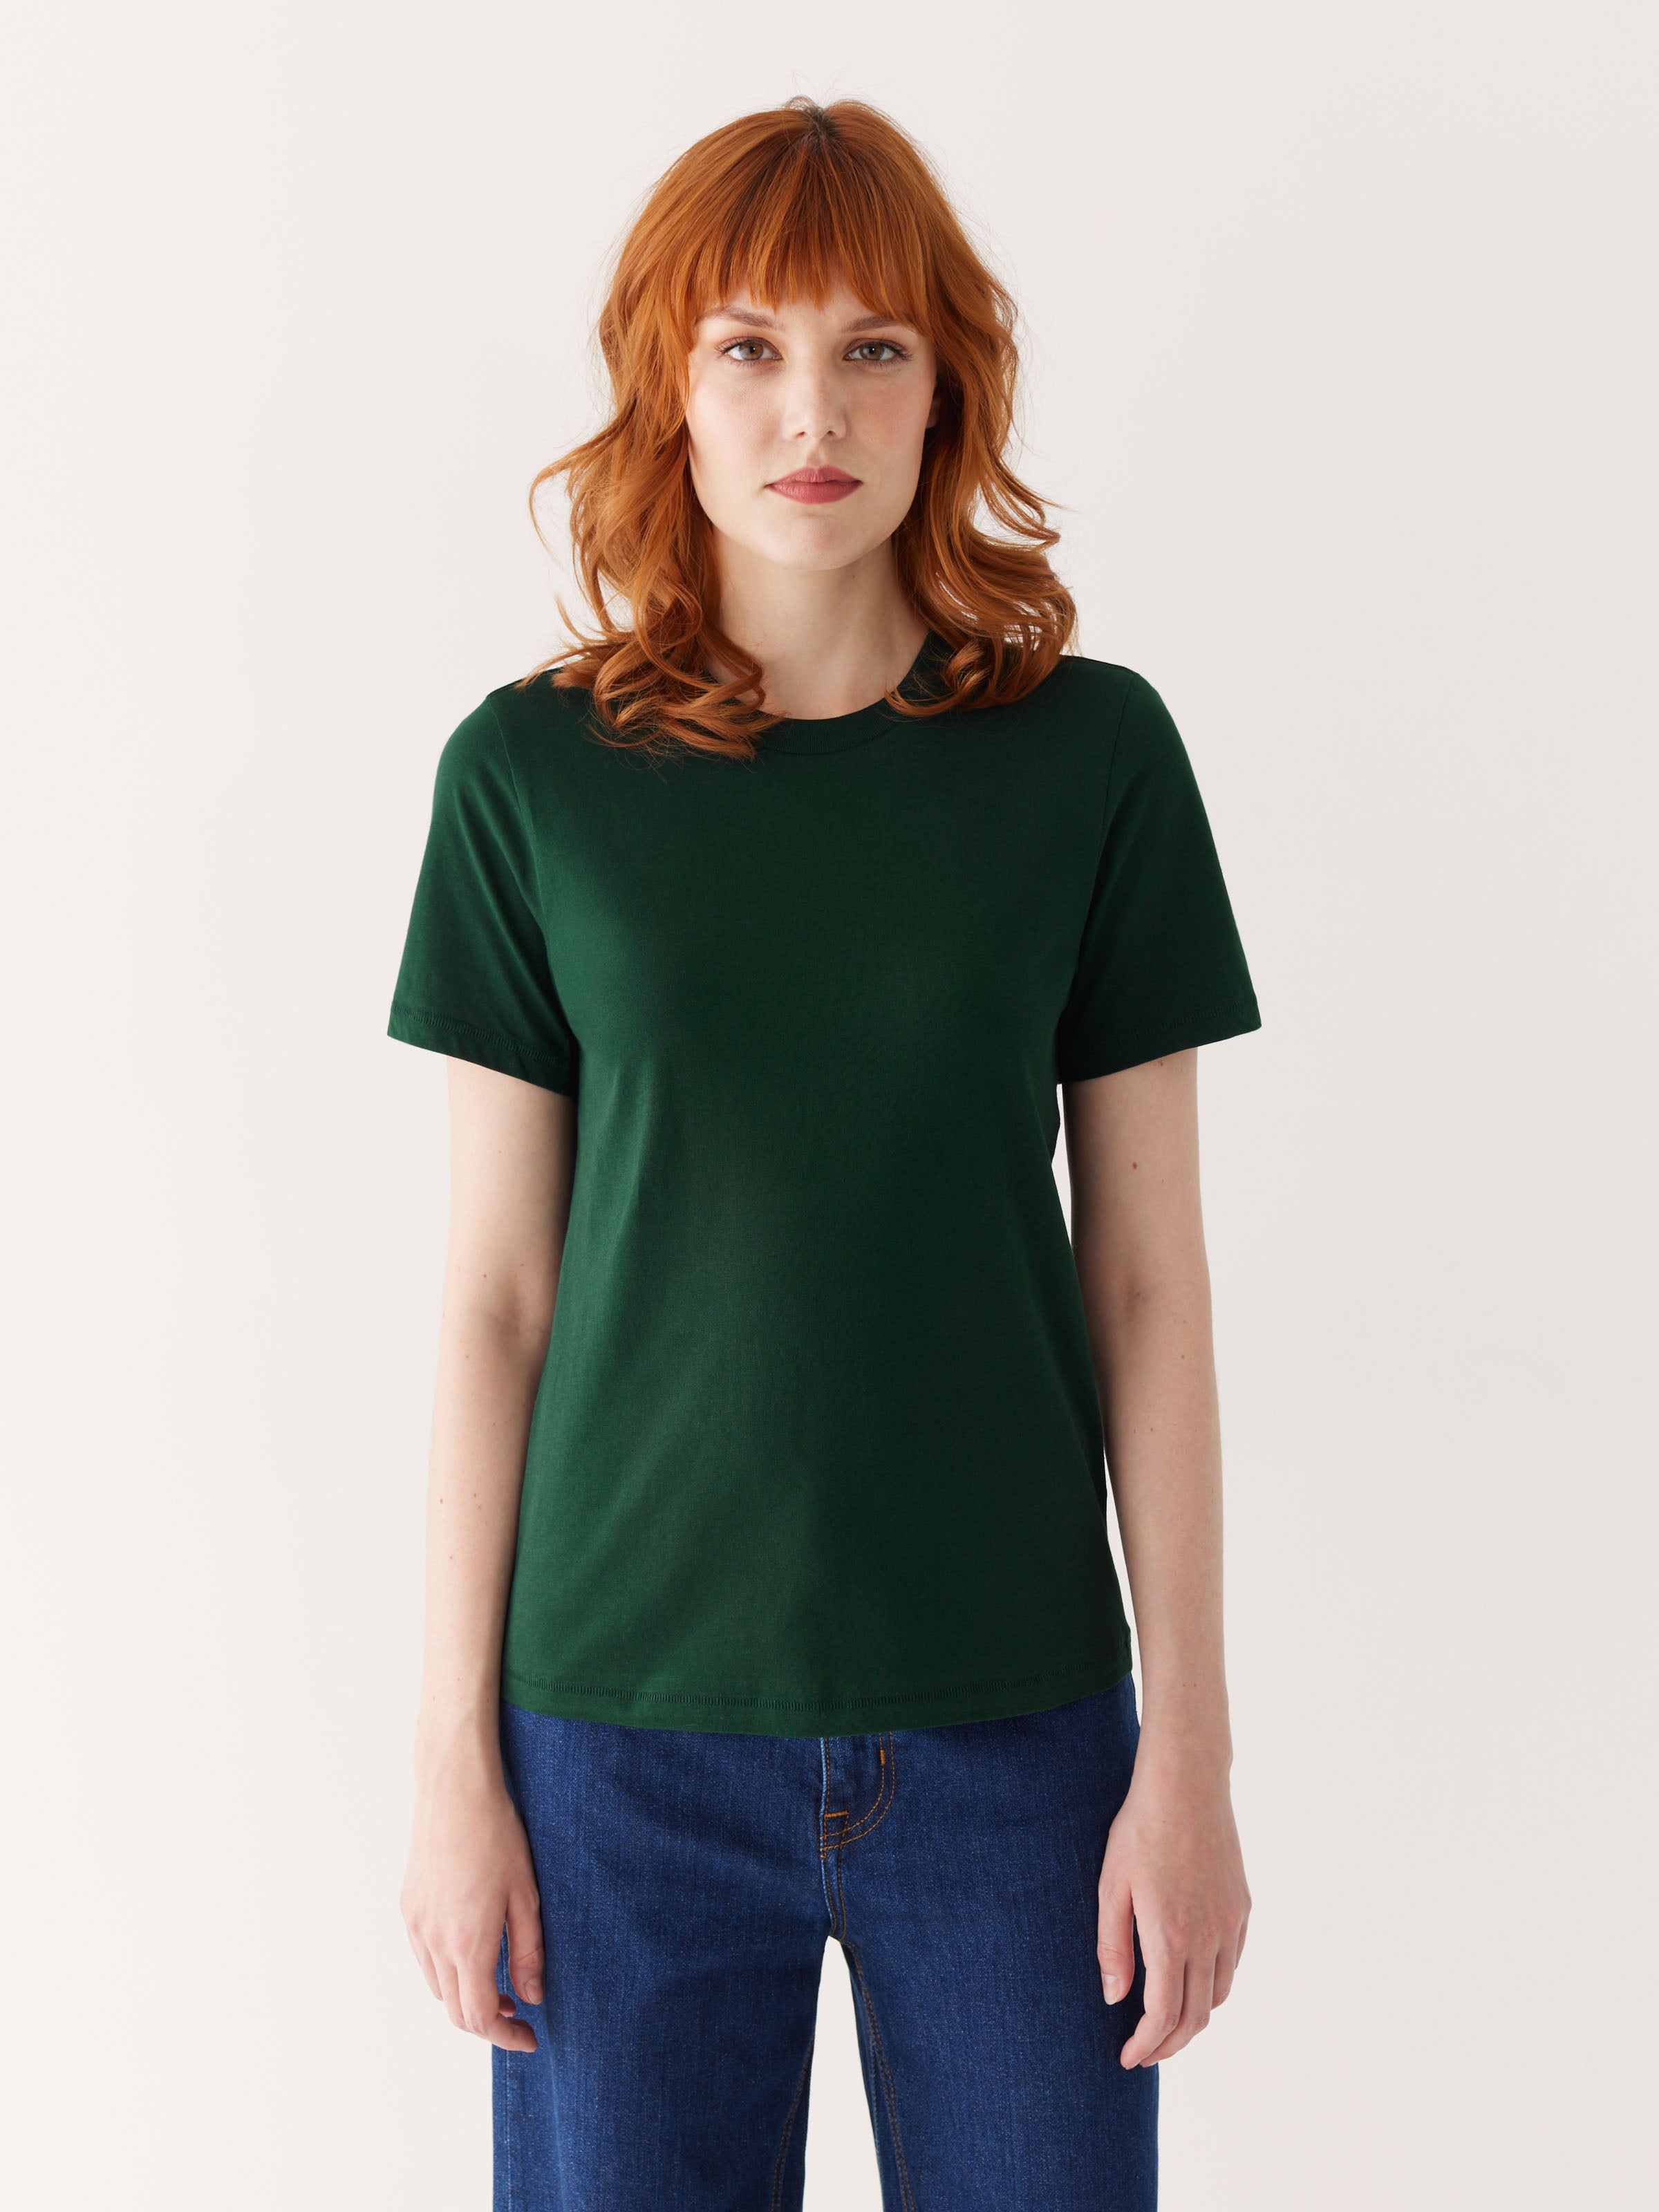 The Essential T-Shirt in Forest Green